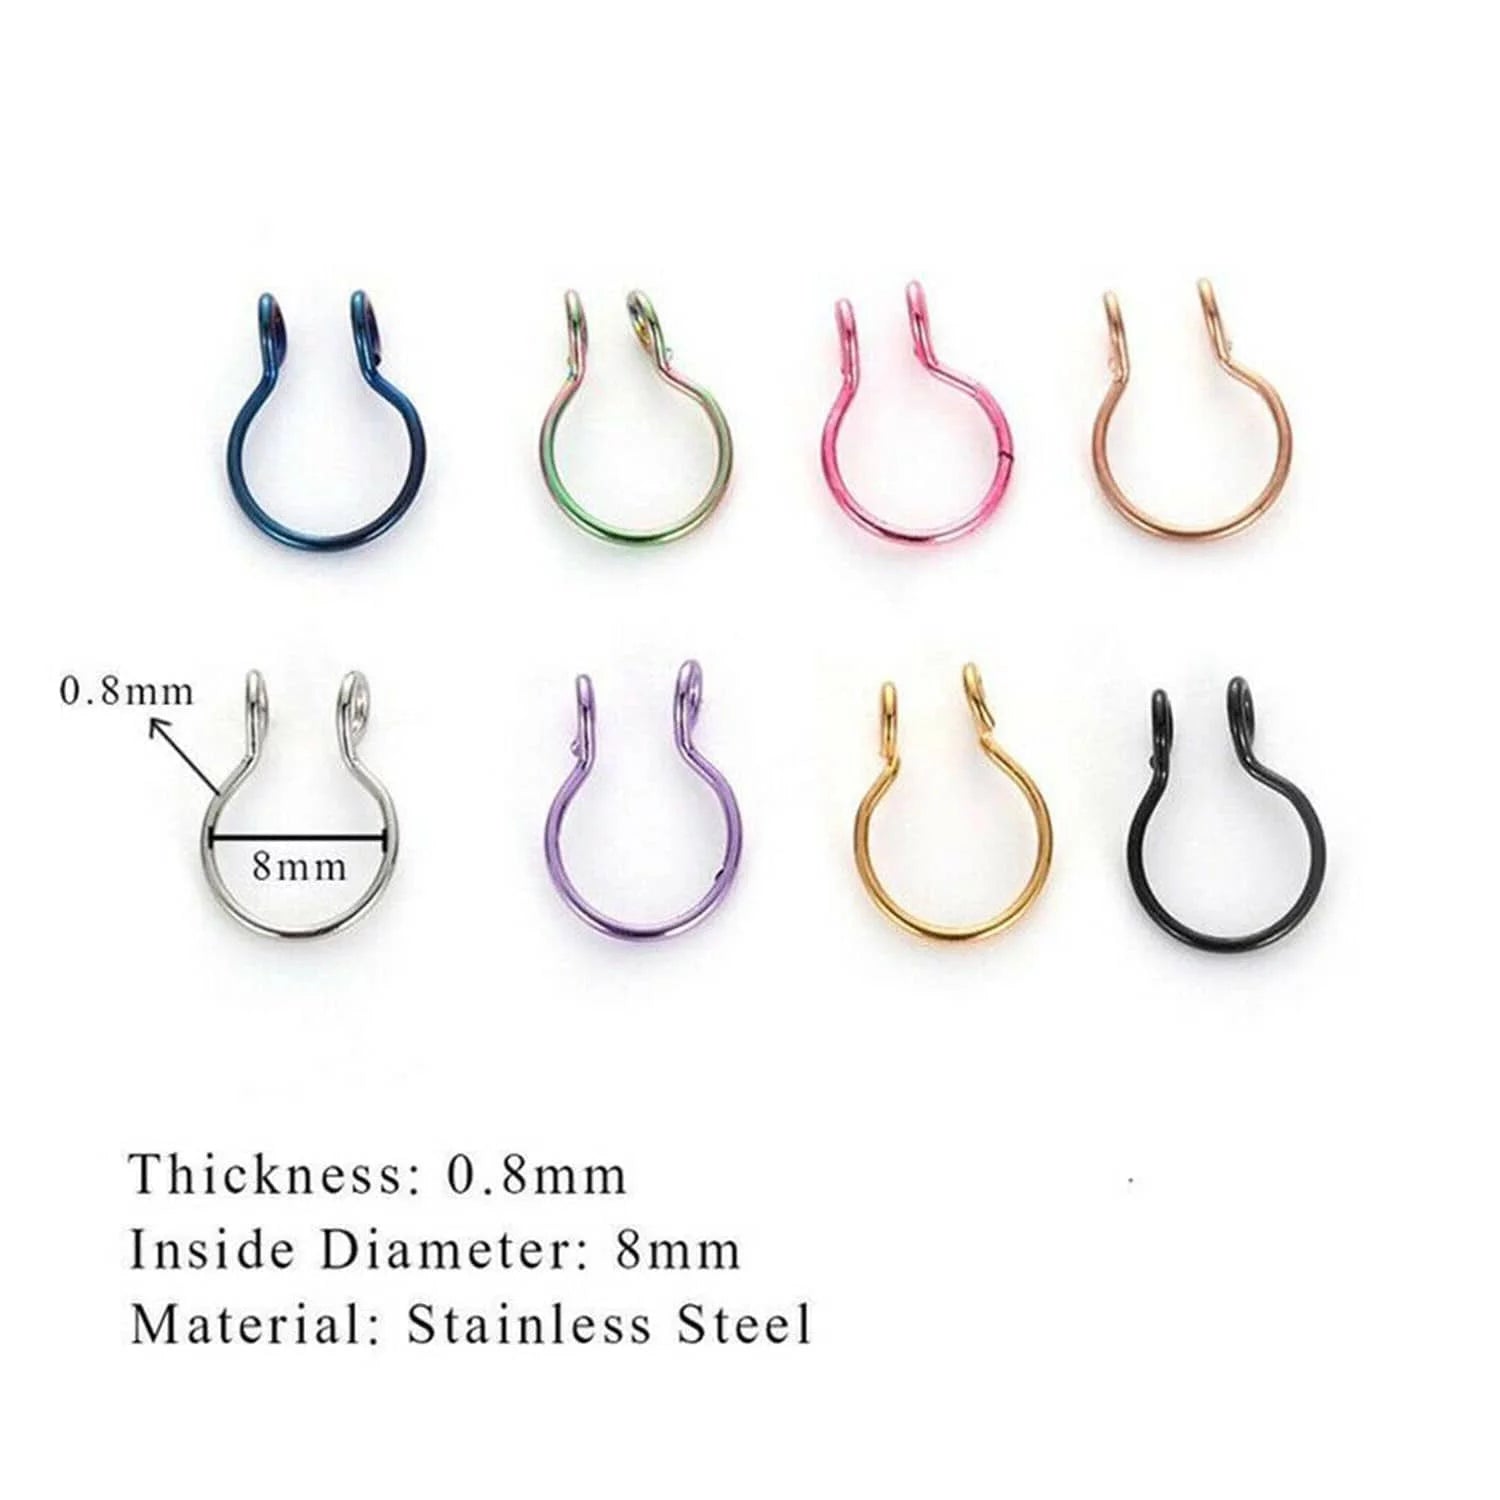 Nose Rings 20G Simple Nose Hoop Piercing Ring Tight 20g Nose Ring Hoop  Silver 20 Gauge Body Jewelry Size Options Fast Shipping Eco Packaging - Etsy